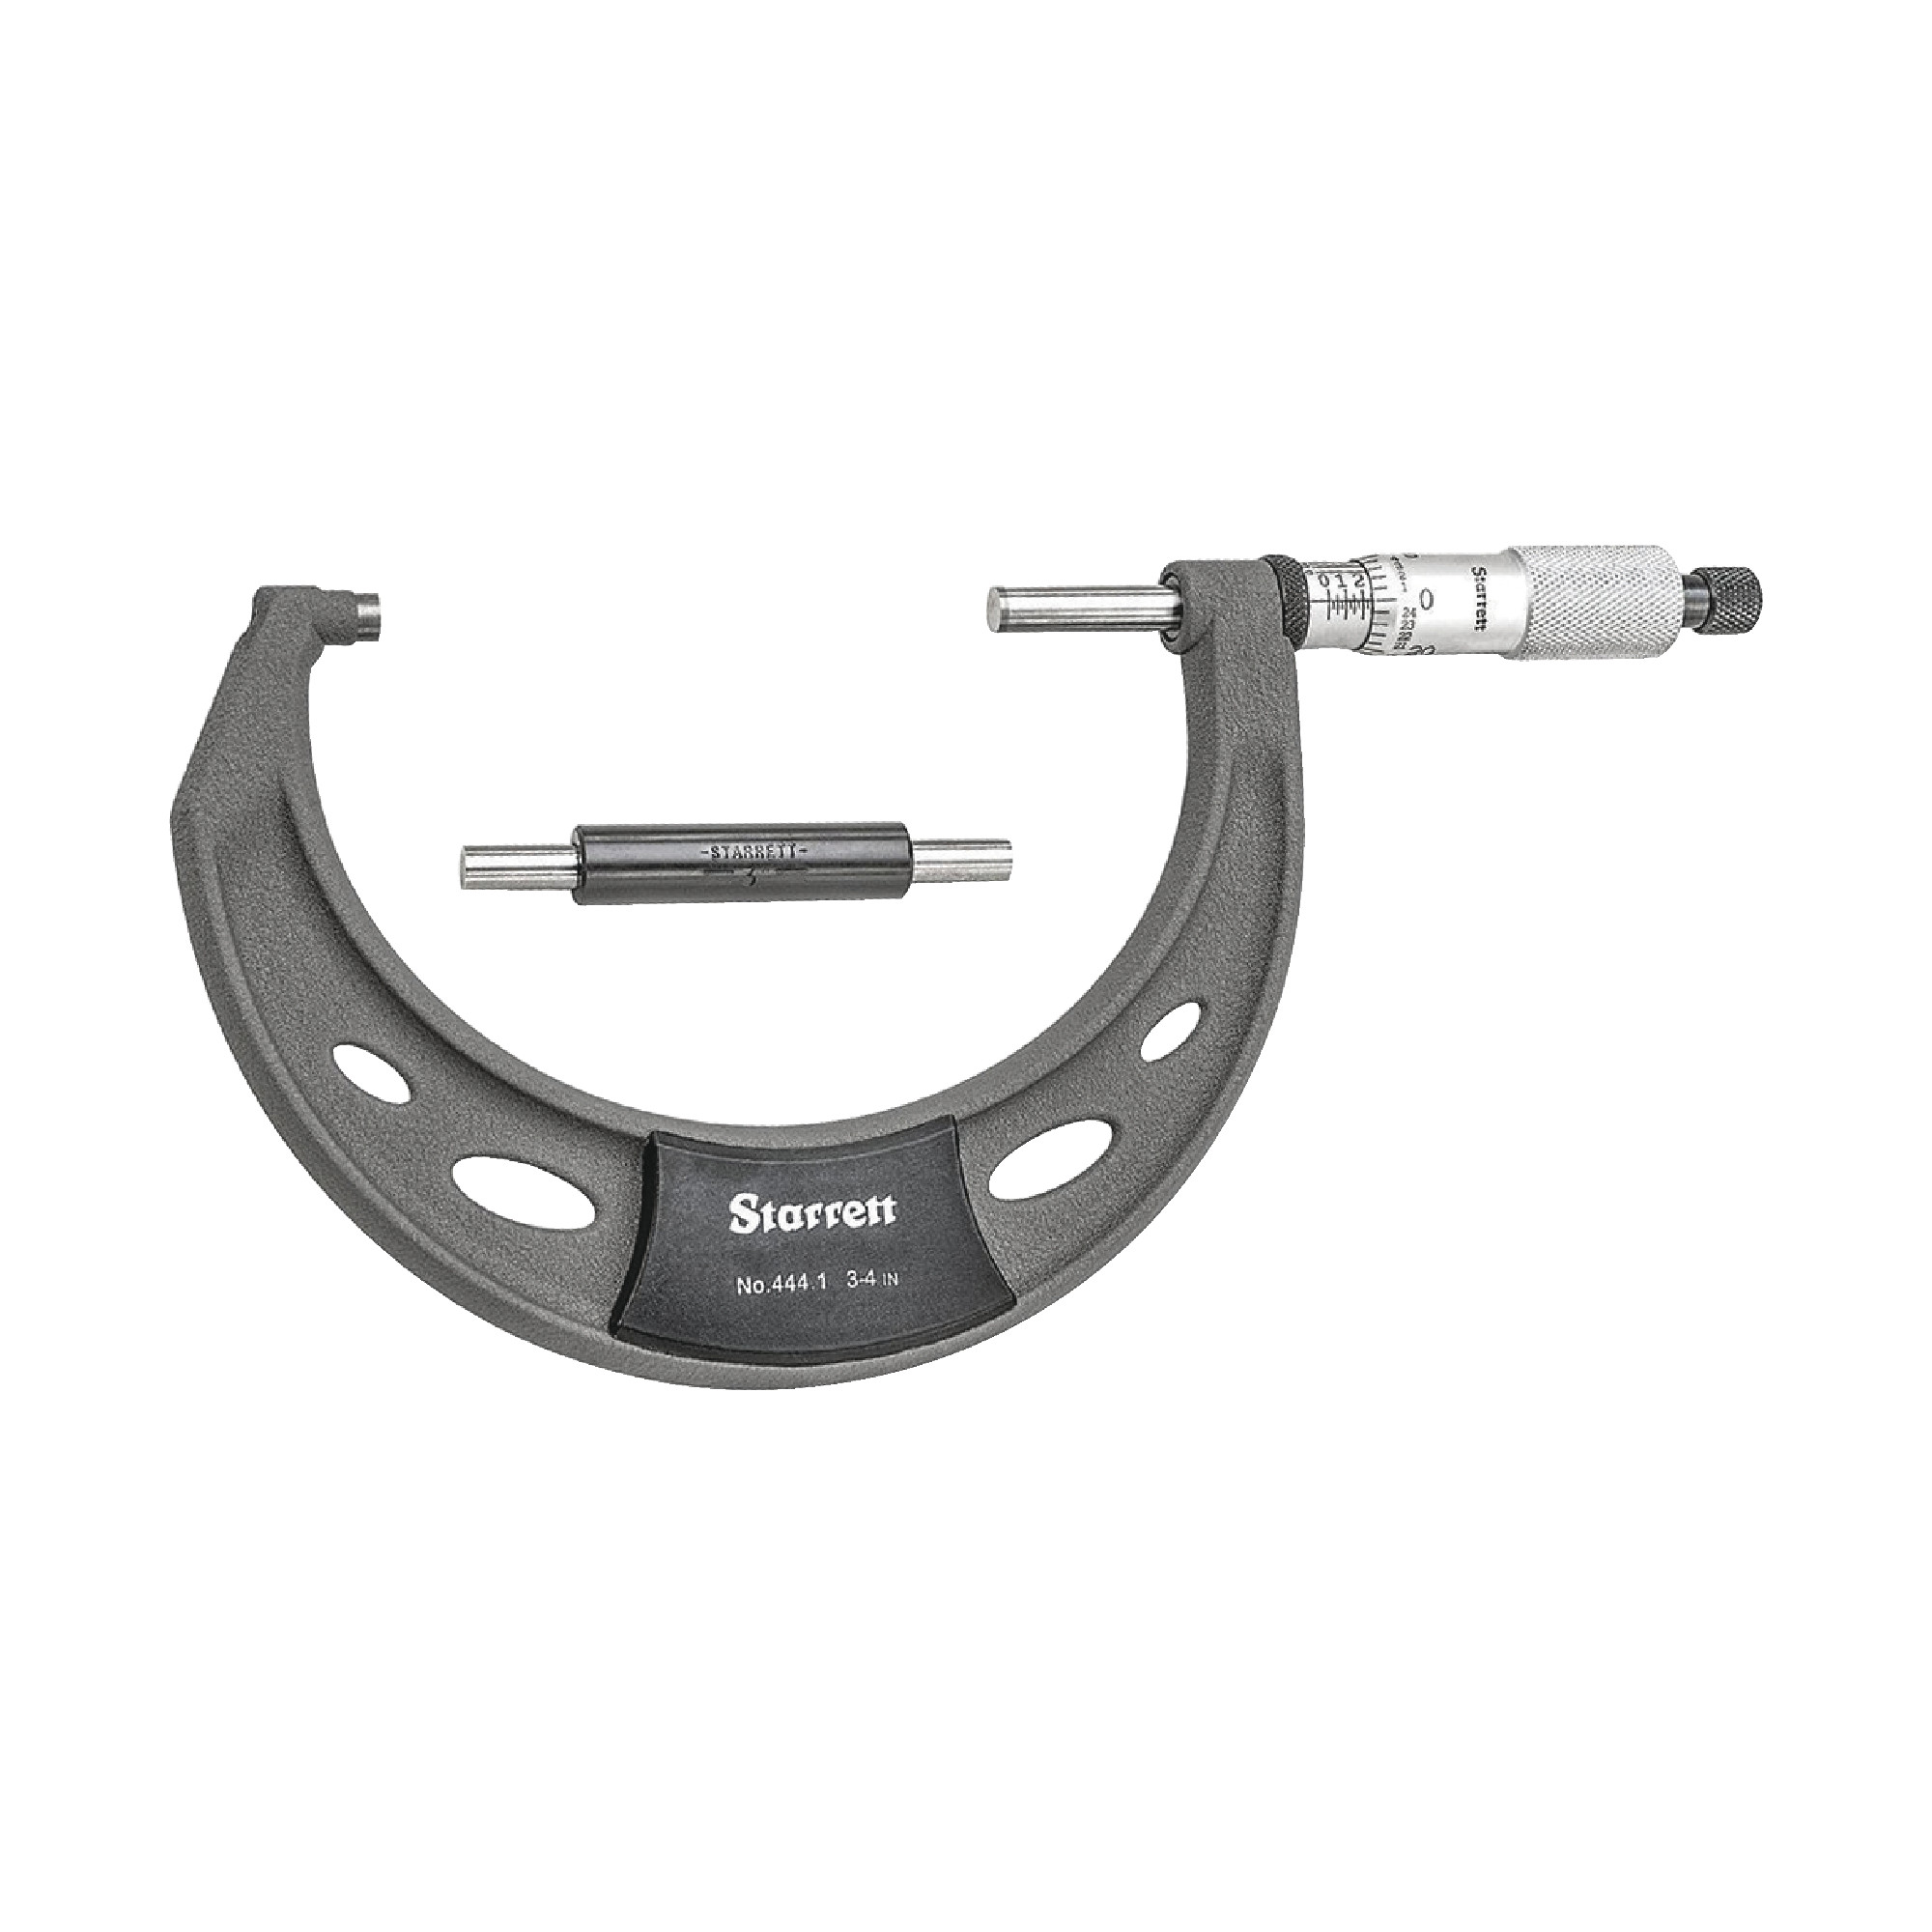 T444 Series Outside Micrometer